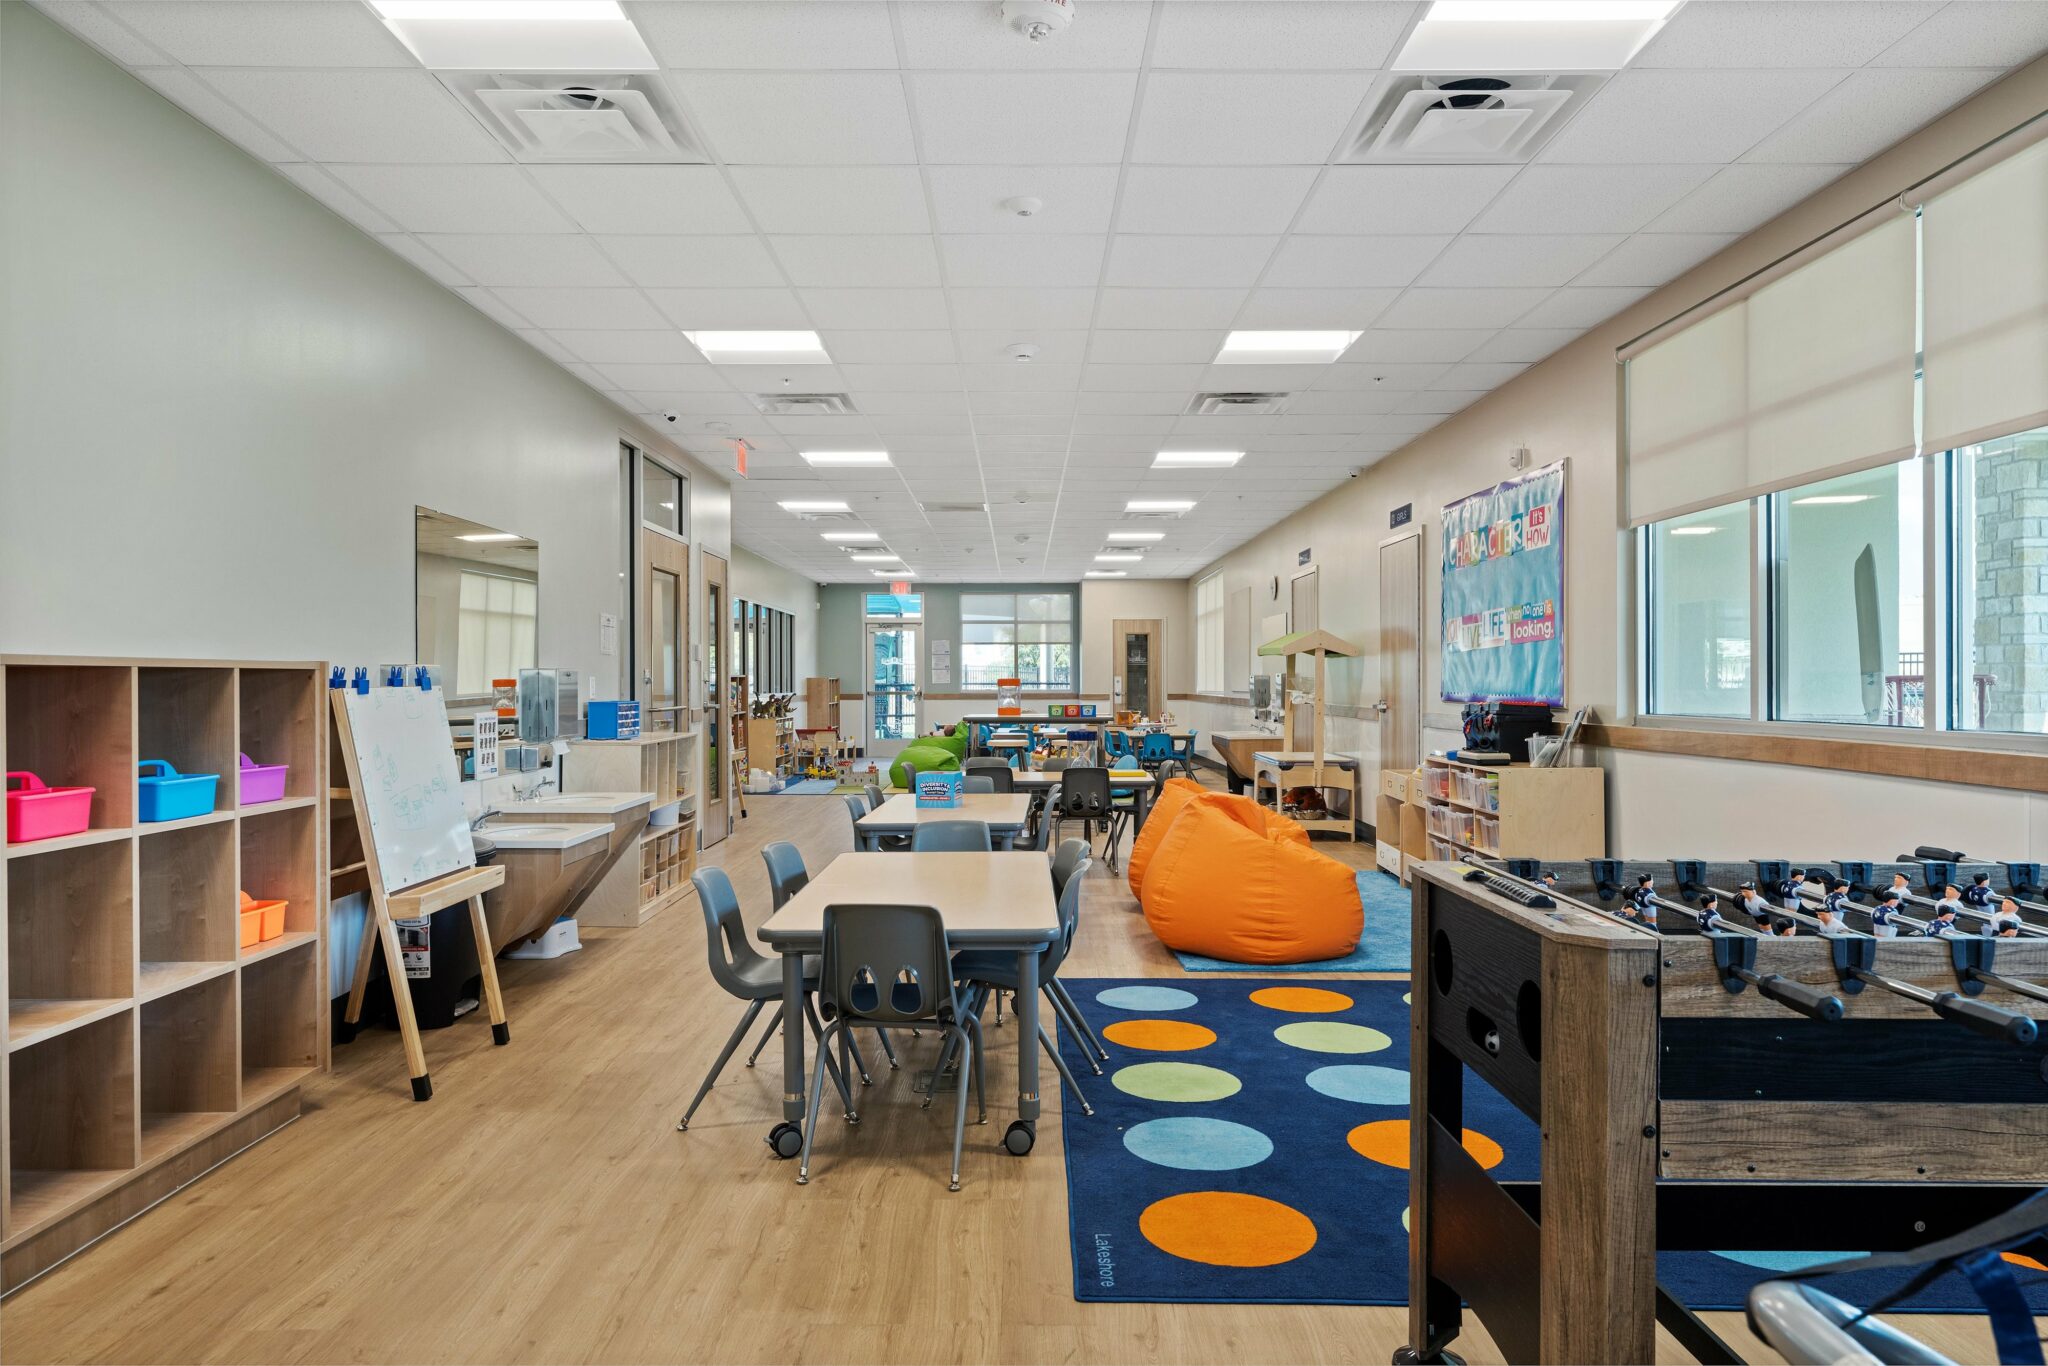 Built Wright Construction Waco, Texas - Kids R Kids Learning Academy of Woodway 3